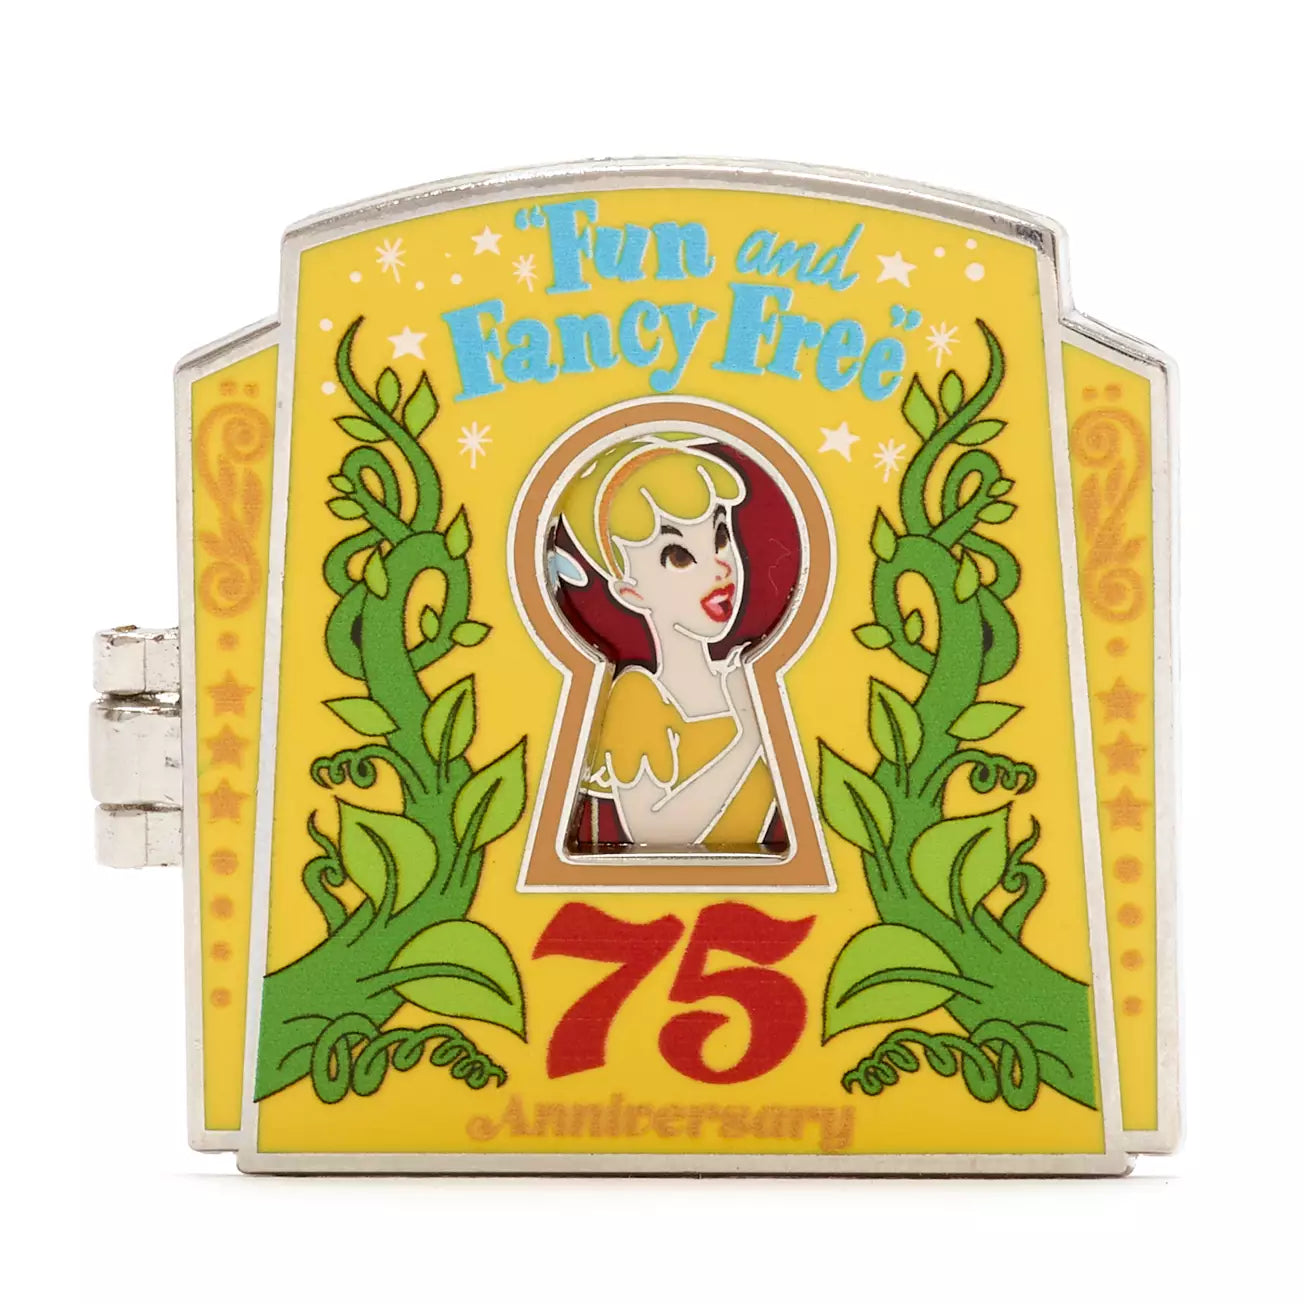 Fun and Fancy Free 75th Anniversary - Limited Release Pin